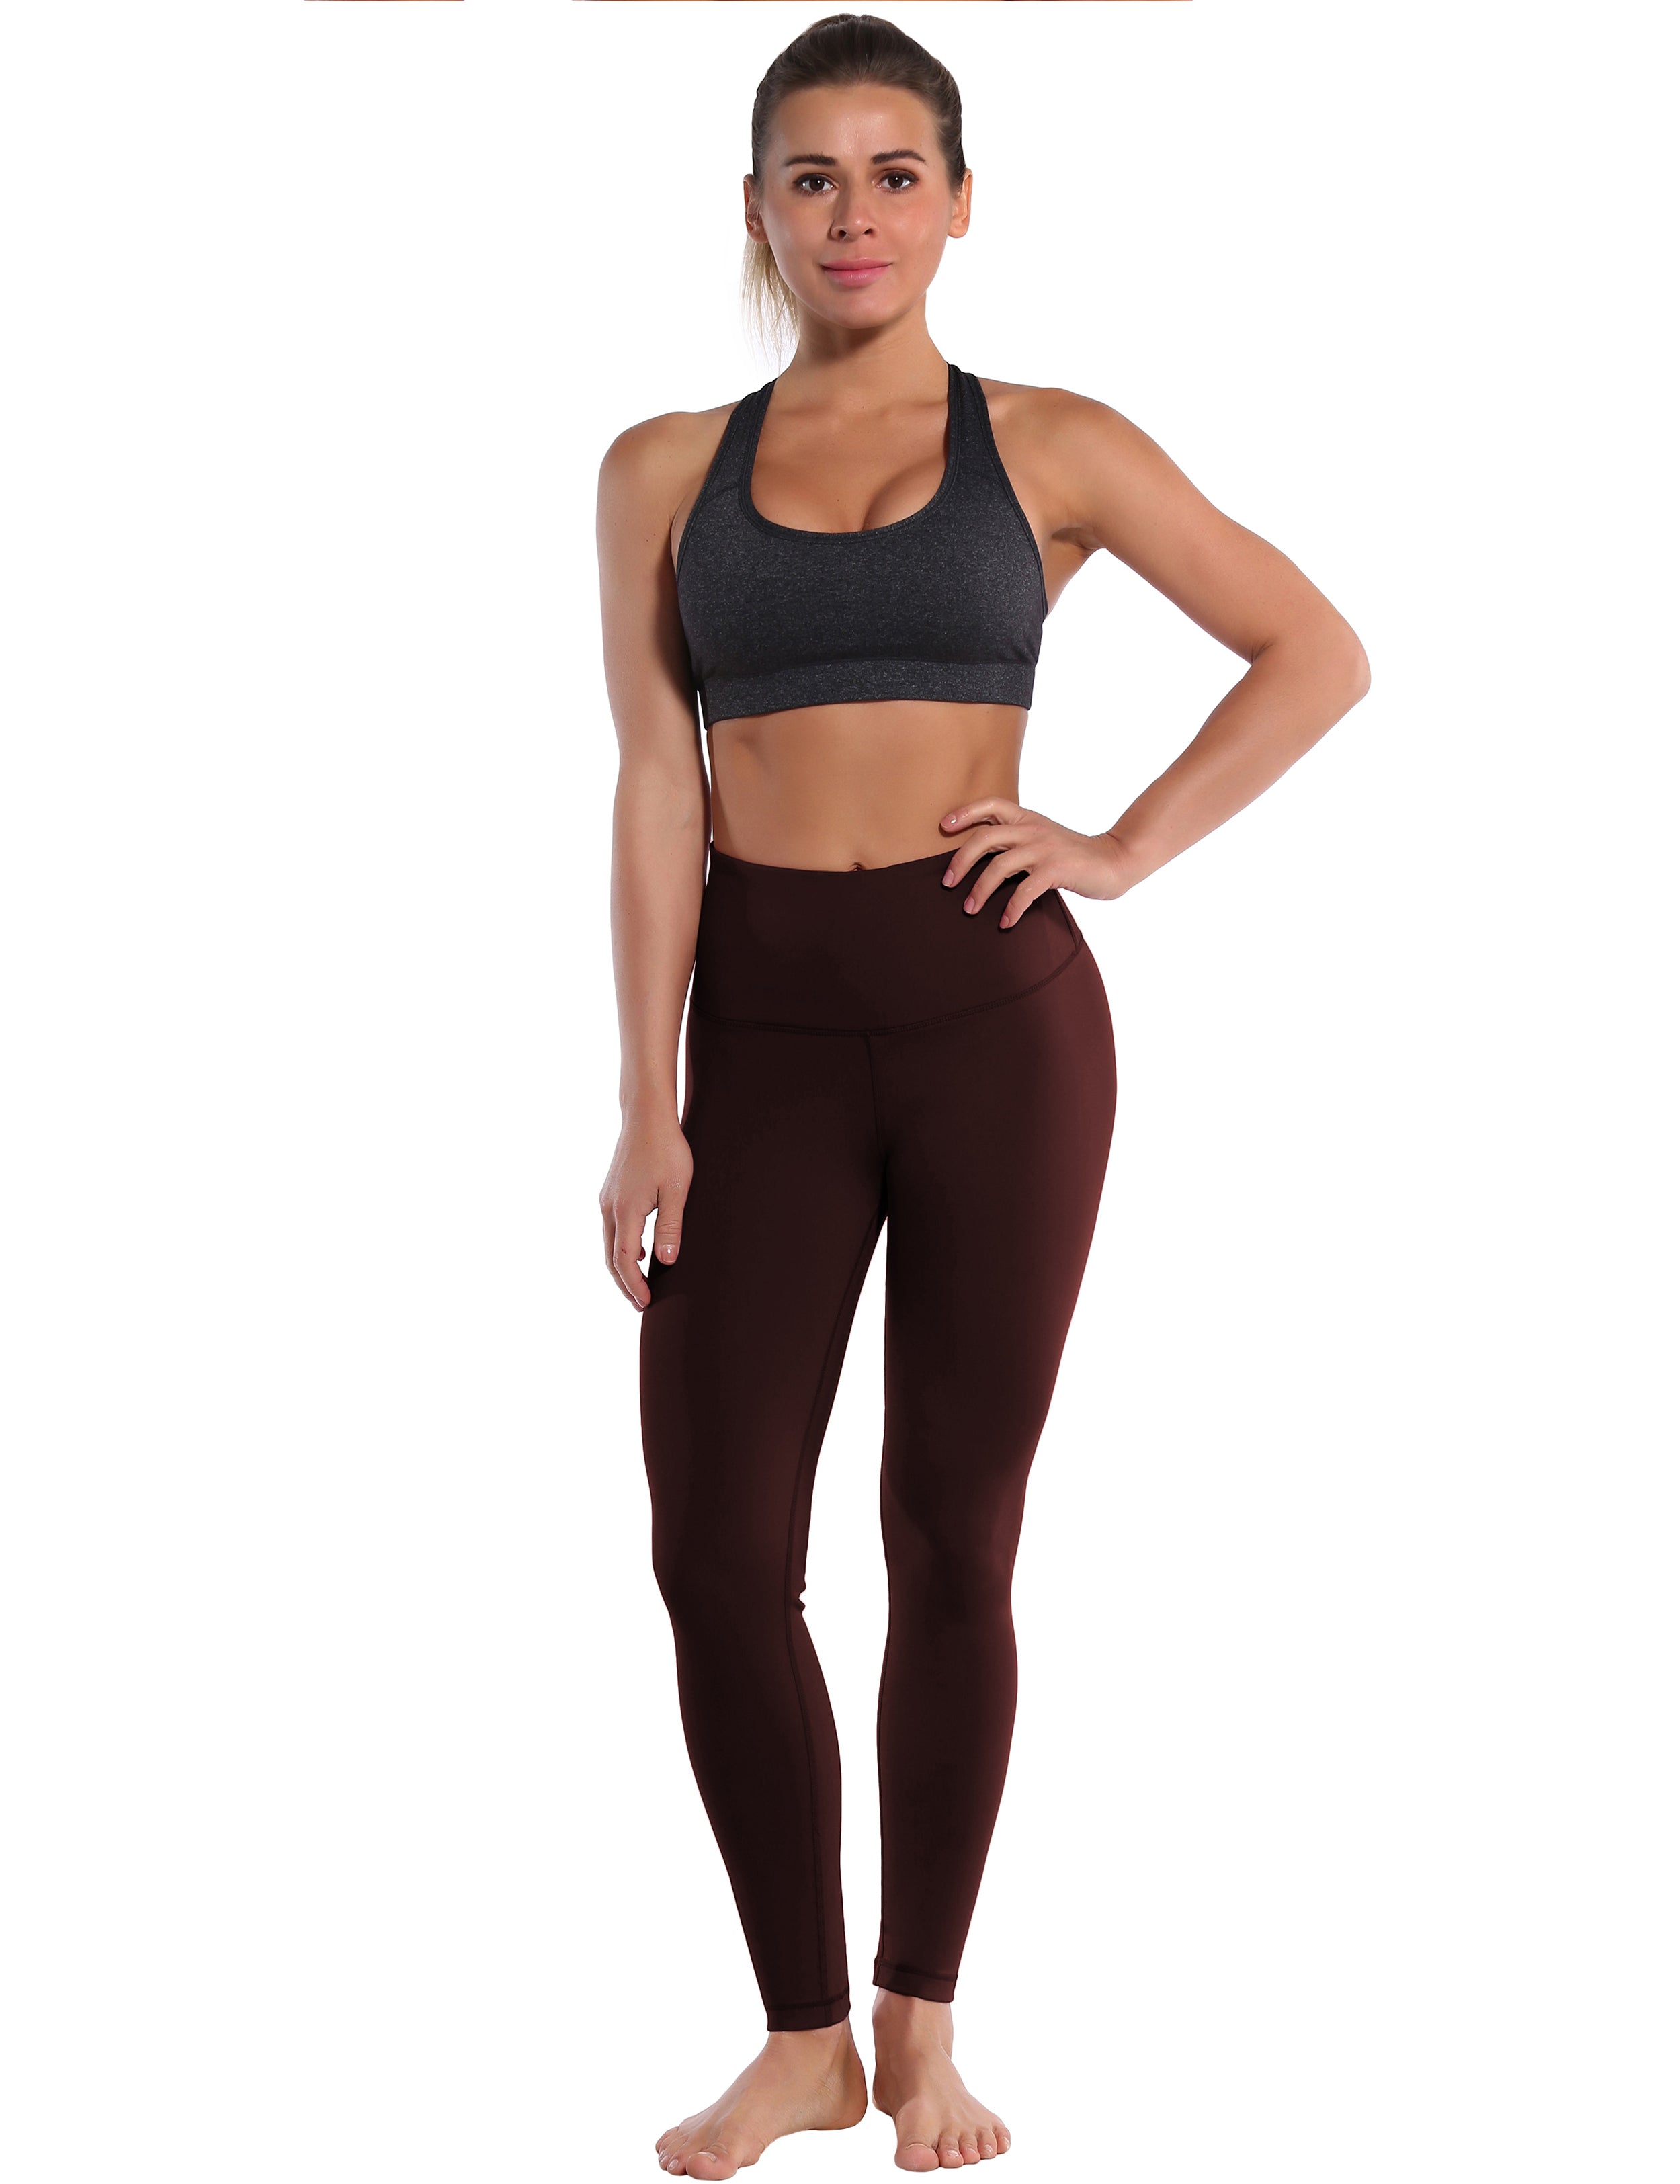 High Waist Yoga Pants mahoganymaroon 75%Nylon/25%Spandex Fabric doesn't attract lint easily 4-way stretch No see-through Moisture-wicking Tummy control Inner pocket Four lengths